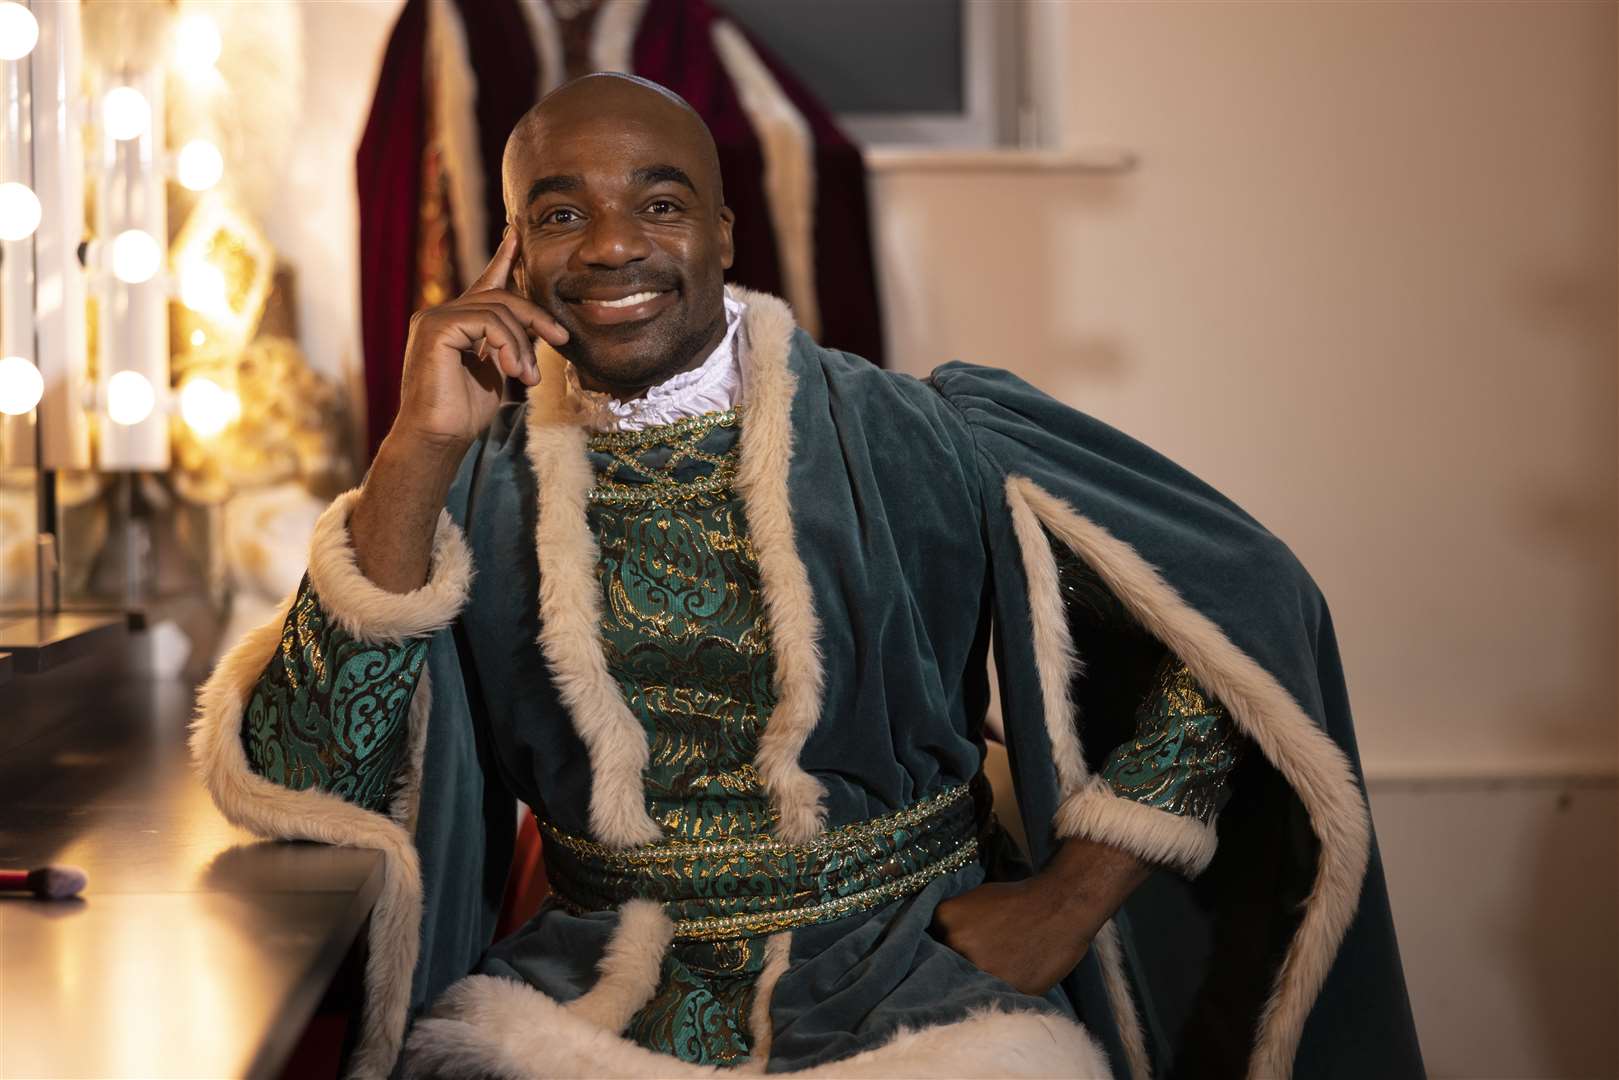 Former Strictly Come Dancing Winner Ore Oduba will perform at the Marlowe Theatre in Canterbury for this year's Sleeping Beauty panto. Picture: David Oxberry